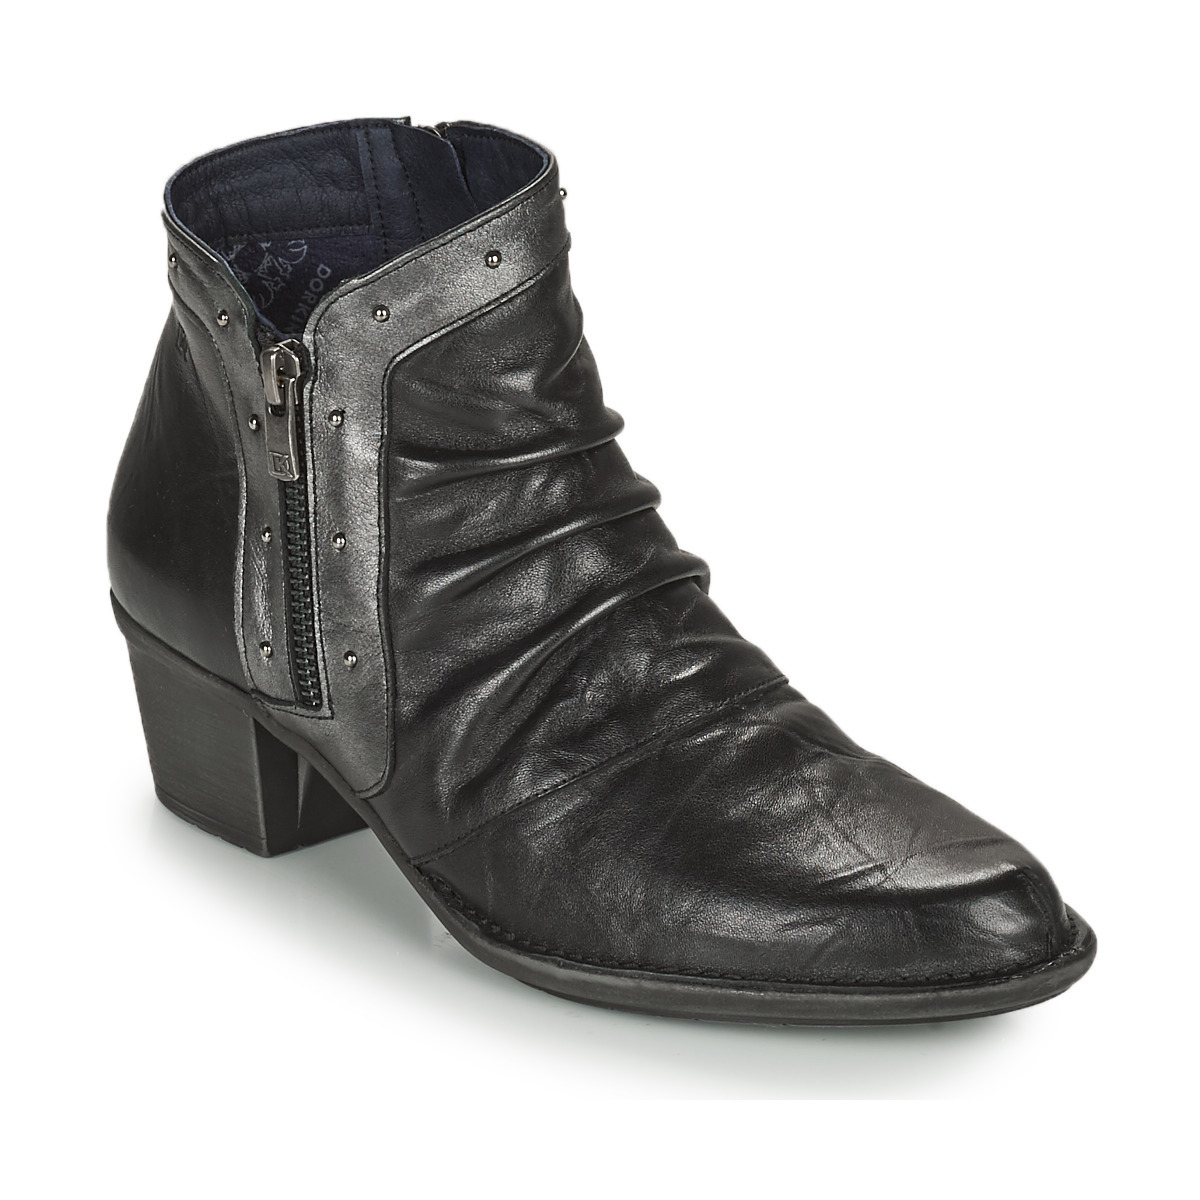 Black - Ankle Boots - Dorking - Woman - Spartoo GOOFASH